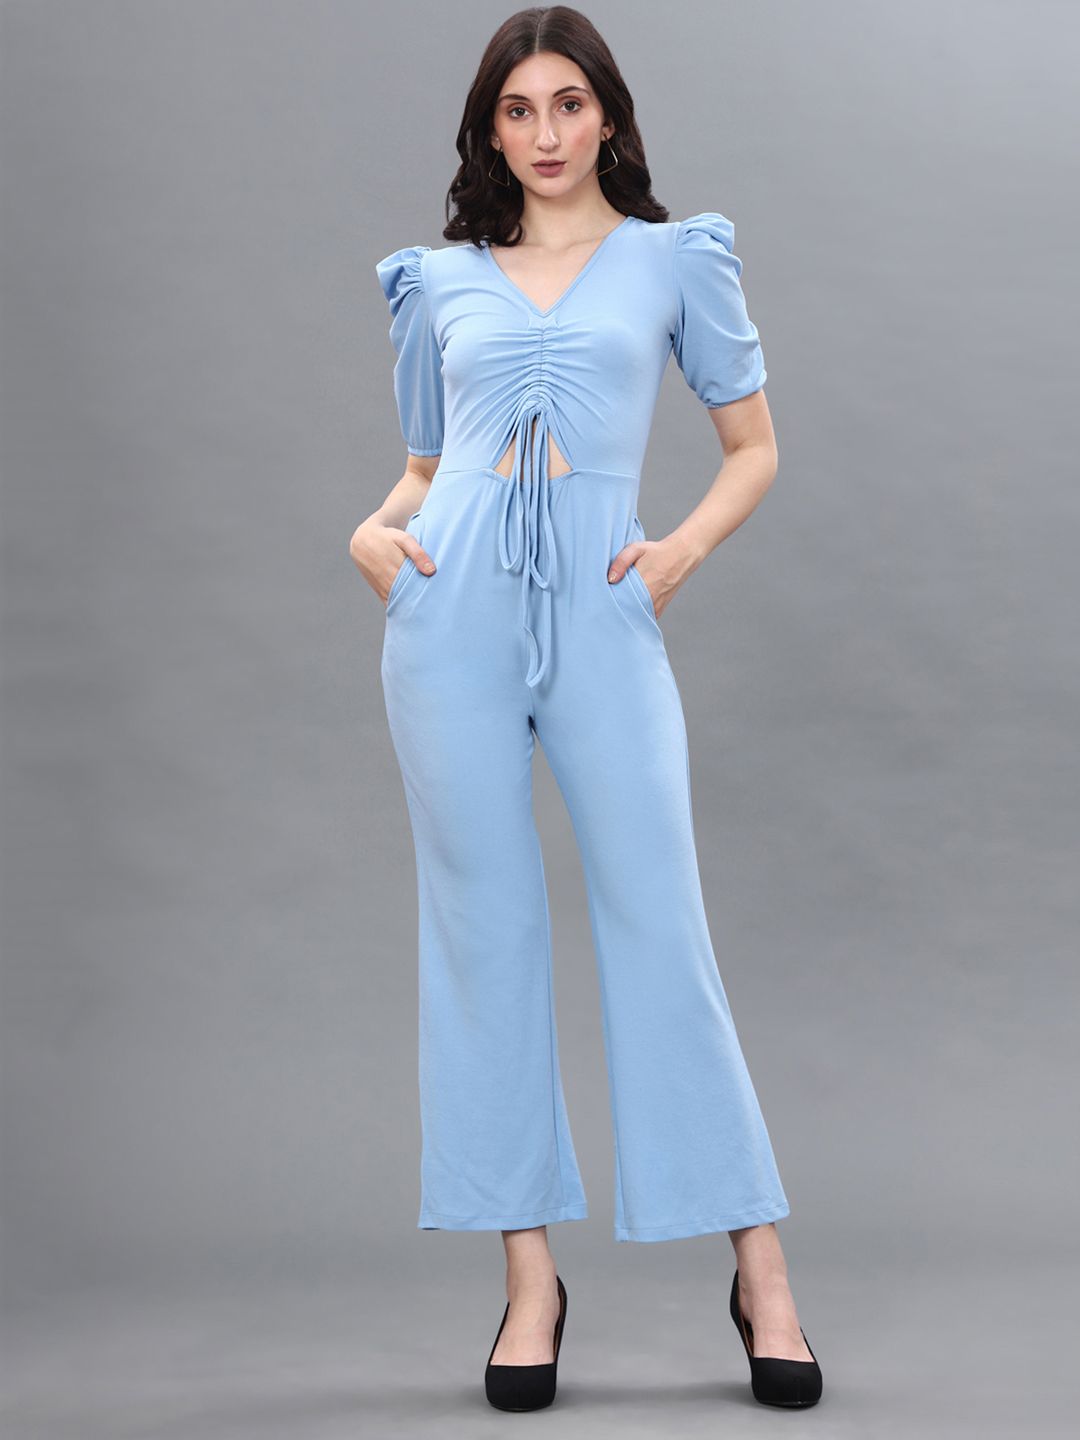 Selvia Light Blue Lycra Party Wear Jump Suit Price in India